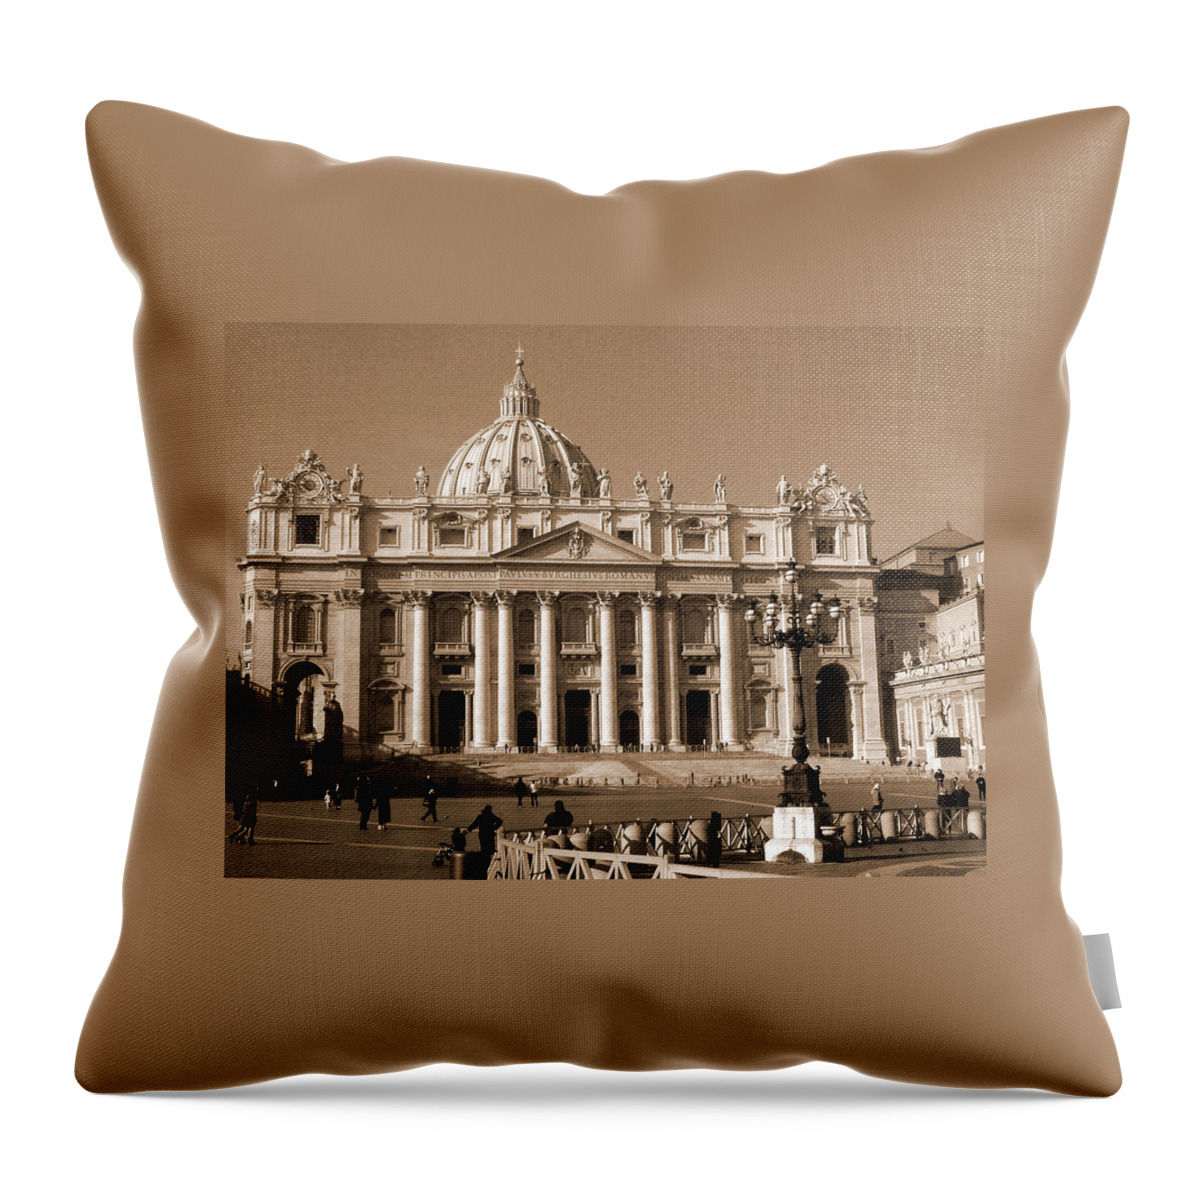 Sepia Throw Pillow featuring the photograph St. Peter's Basilica by Donna Corless